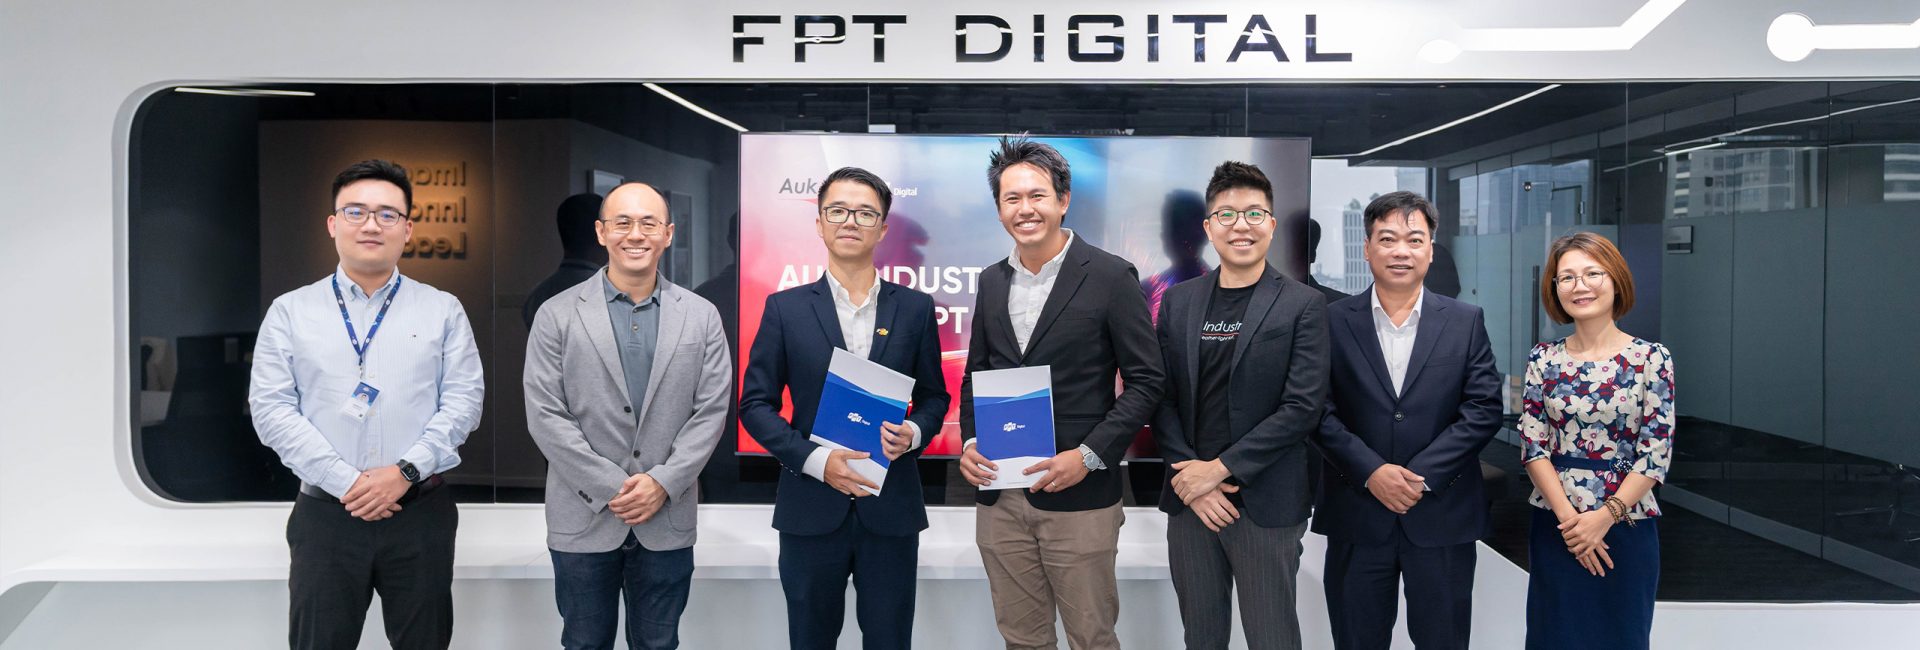 FPT Digital and AUK Industries cooperate to support domestic and foreign businesses to improve the digitalisation process.